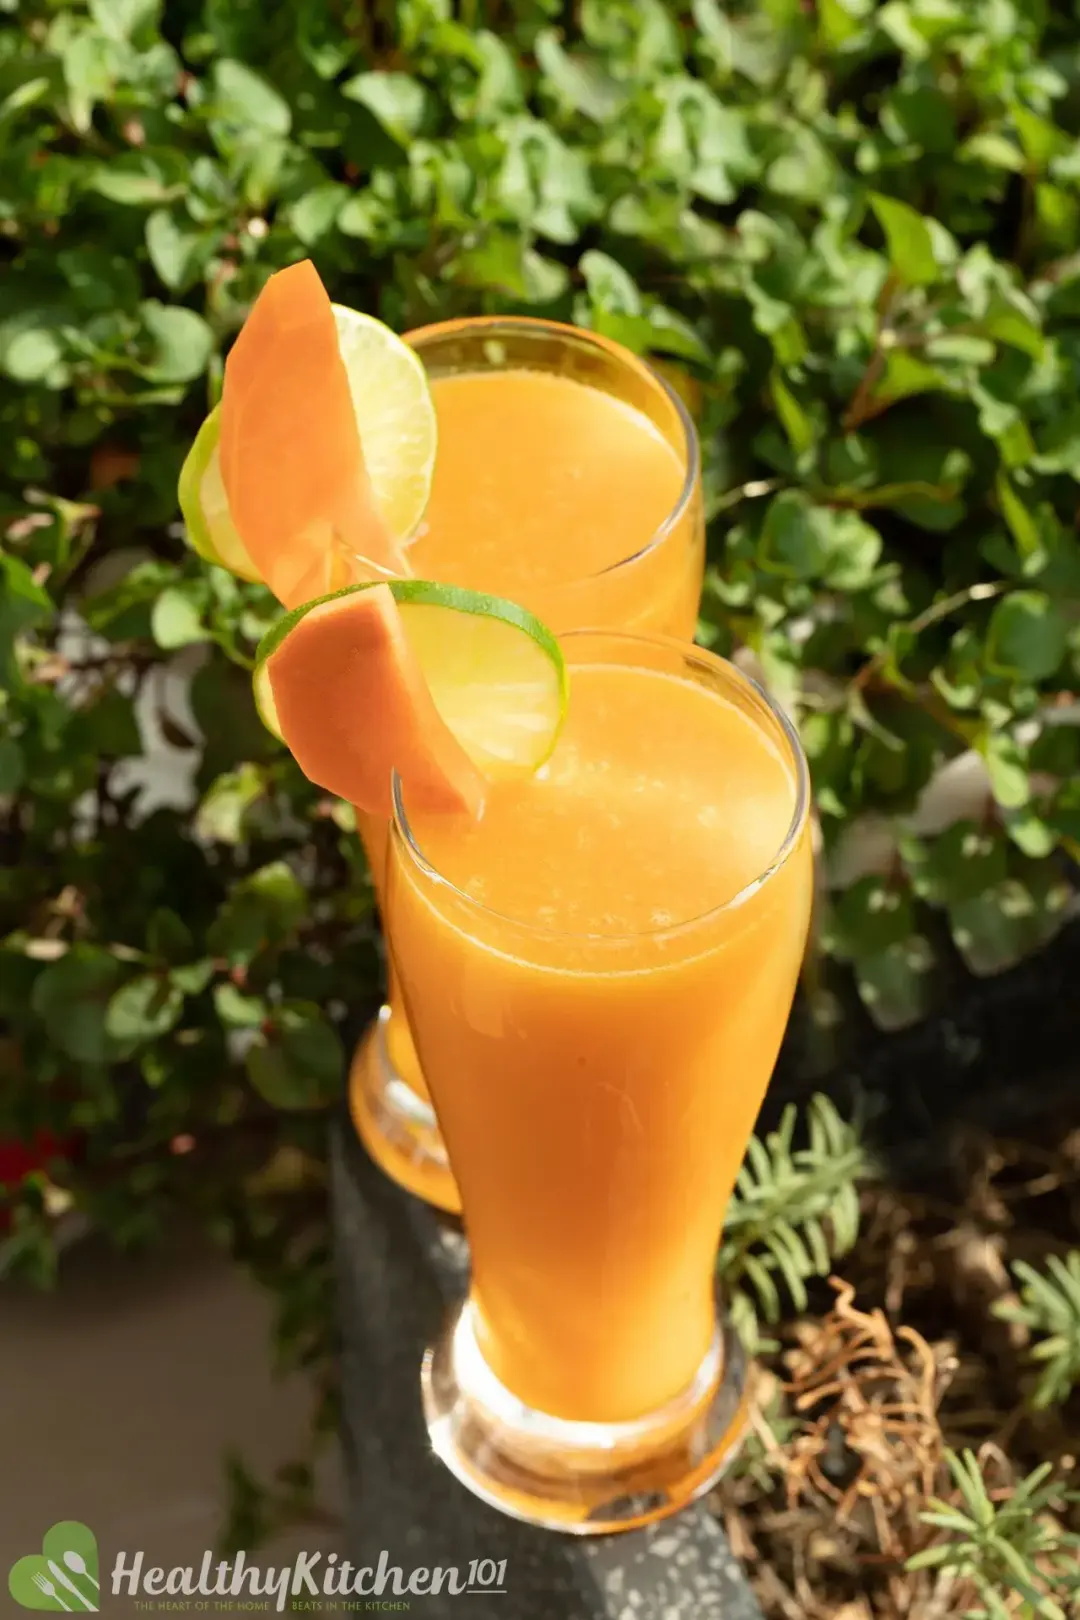 Two glasses of a milky carrot mango drink garnished with lime wheels and put on grass